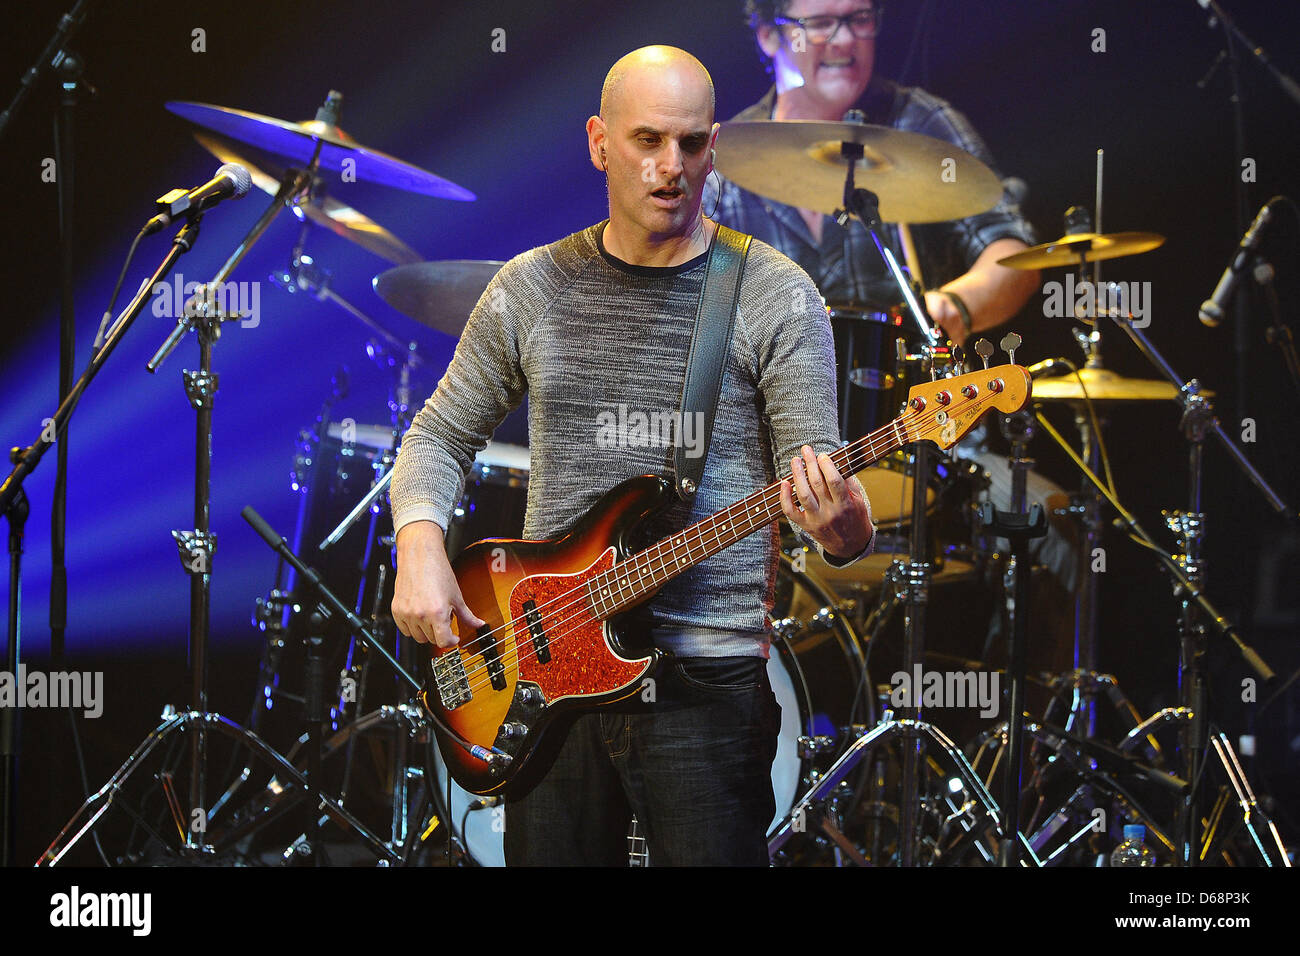 Bassist Guy Erez performs on stage during The Alan Parsons Live Project tour 2012 at Circus Krone in Munich, Germany, 19 July 2012. Photo: Revierfoto Stock Photo